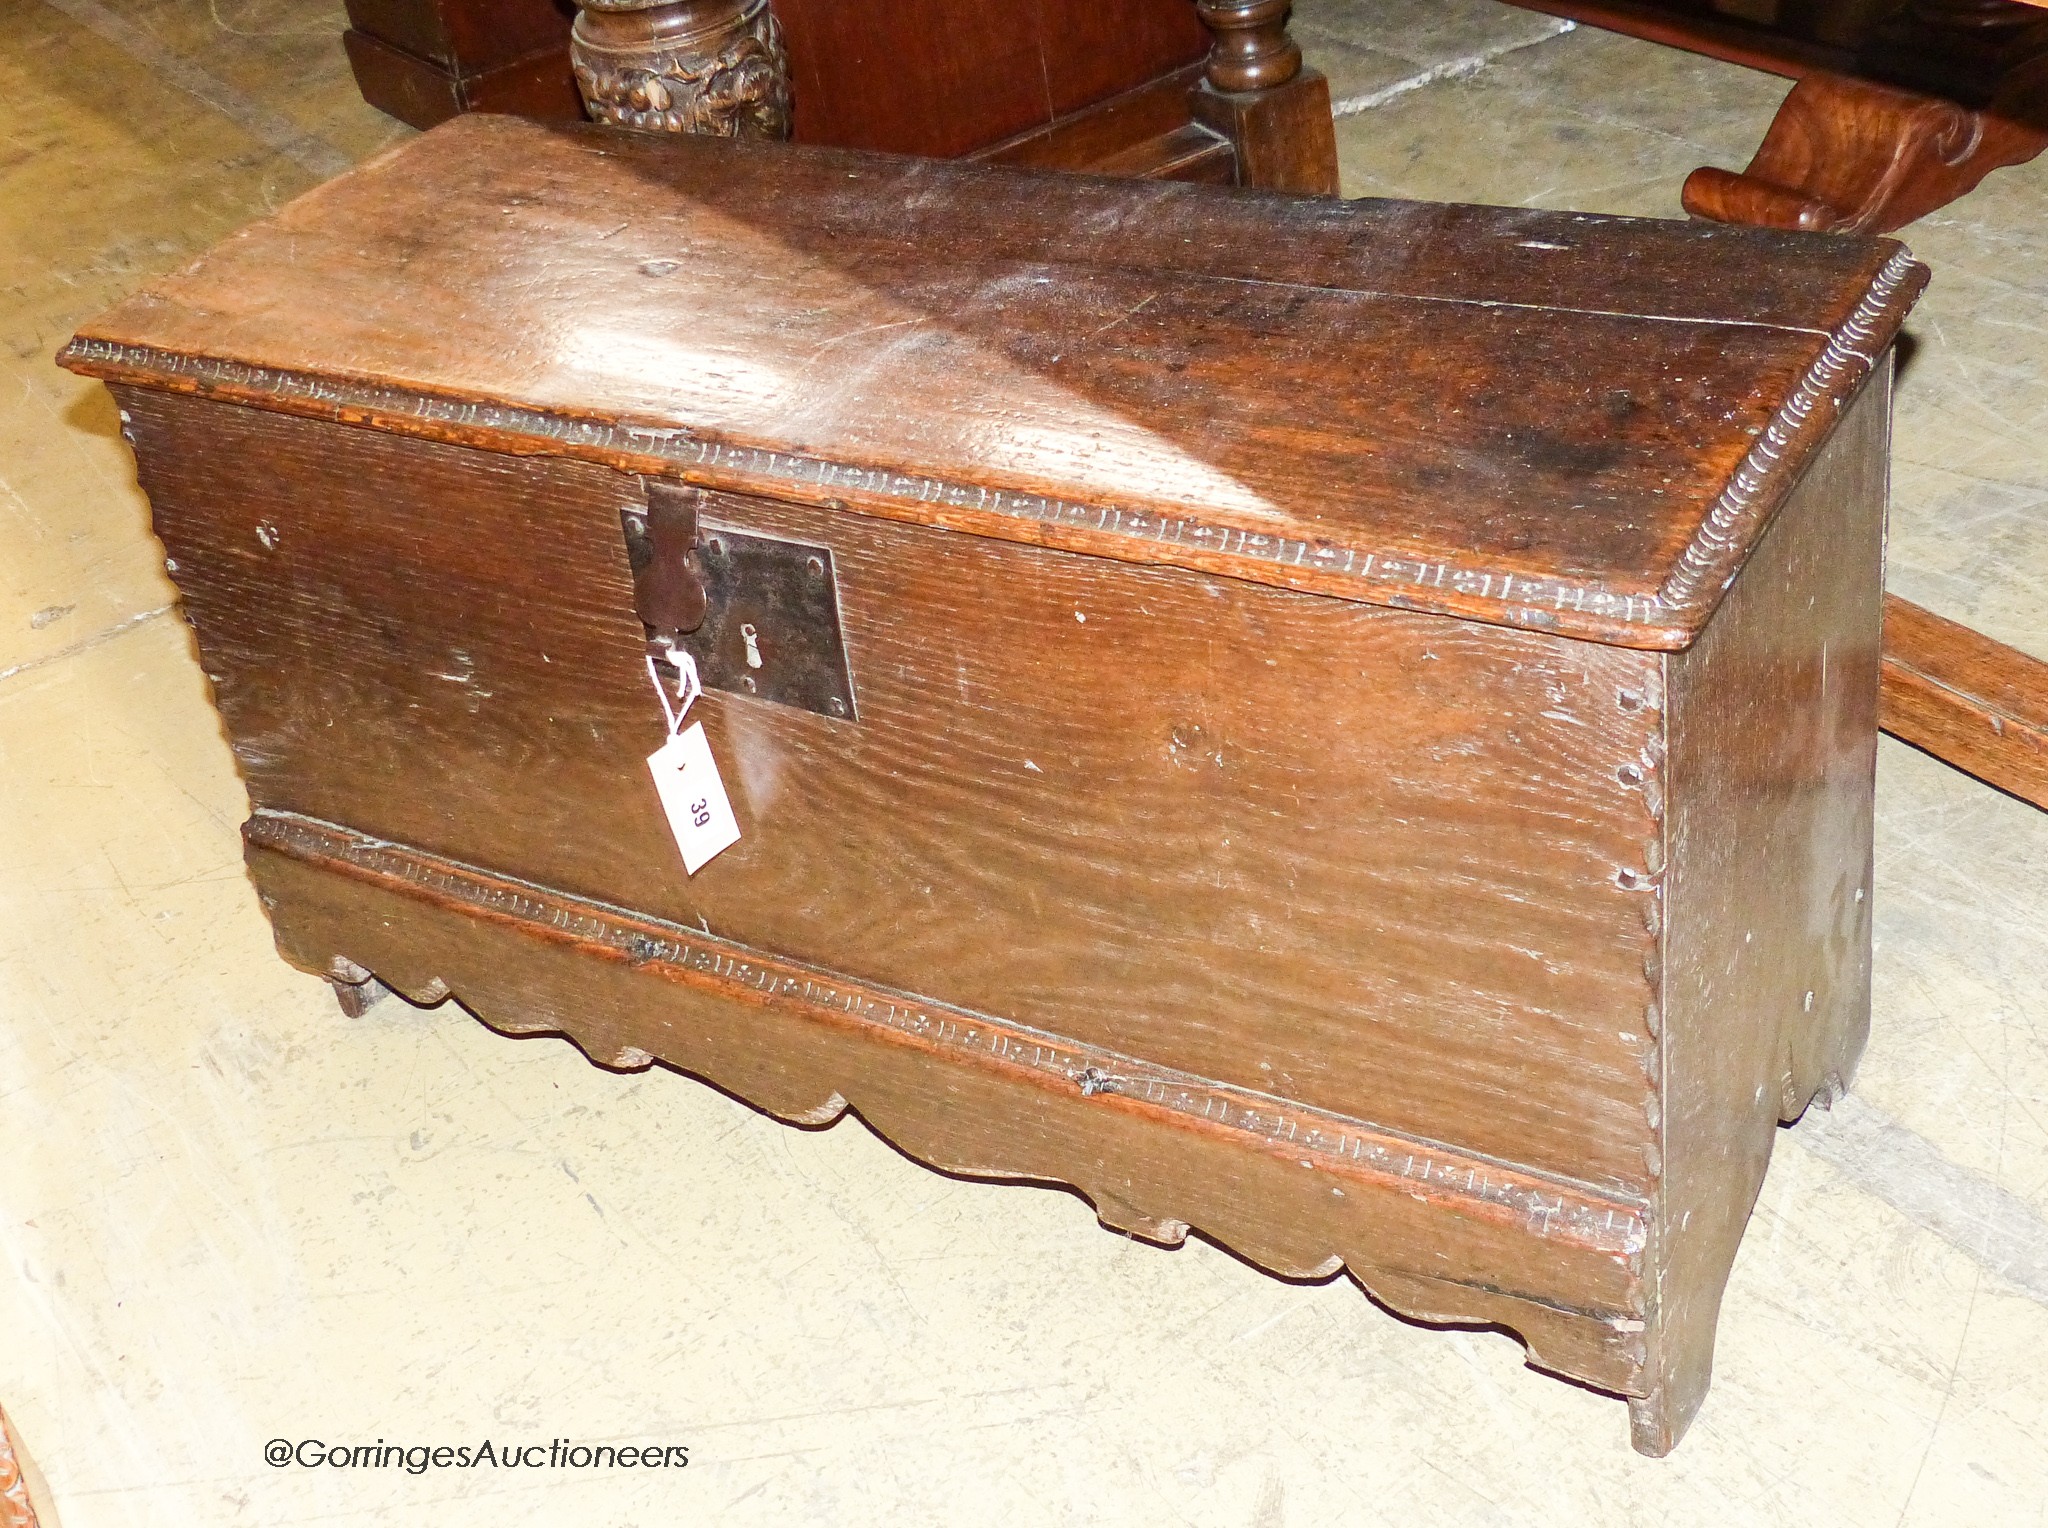 A late 17th / early 18th century small oak six-plank coffer, length 92cm, depth 34cm, height 49cm                                                                                                                           